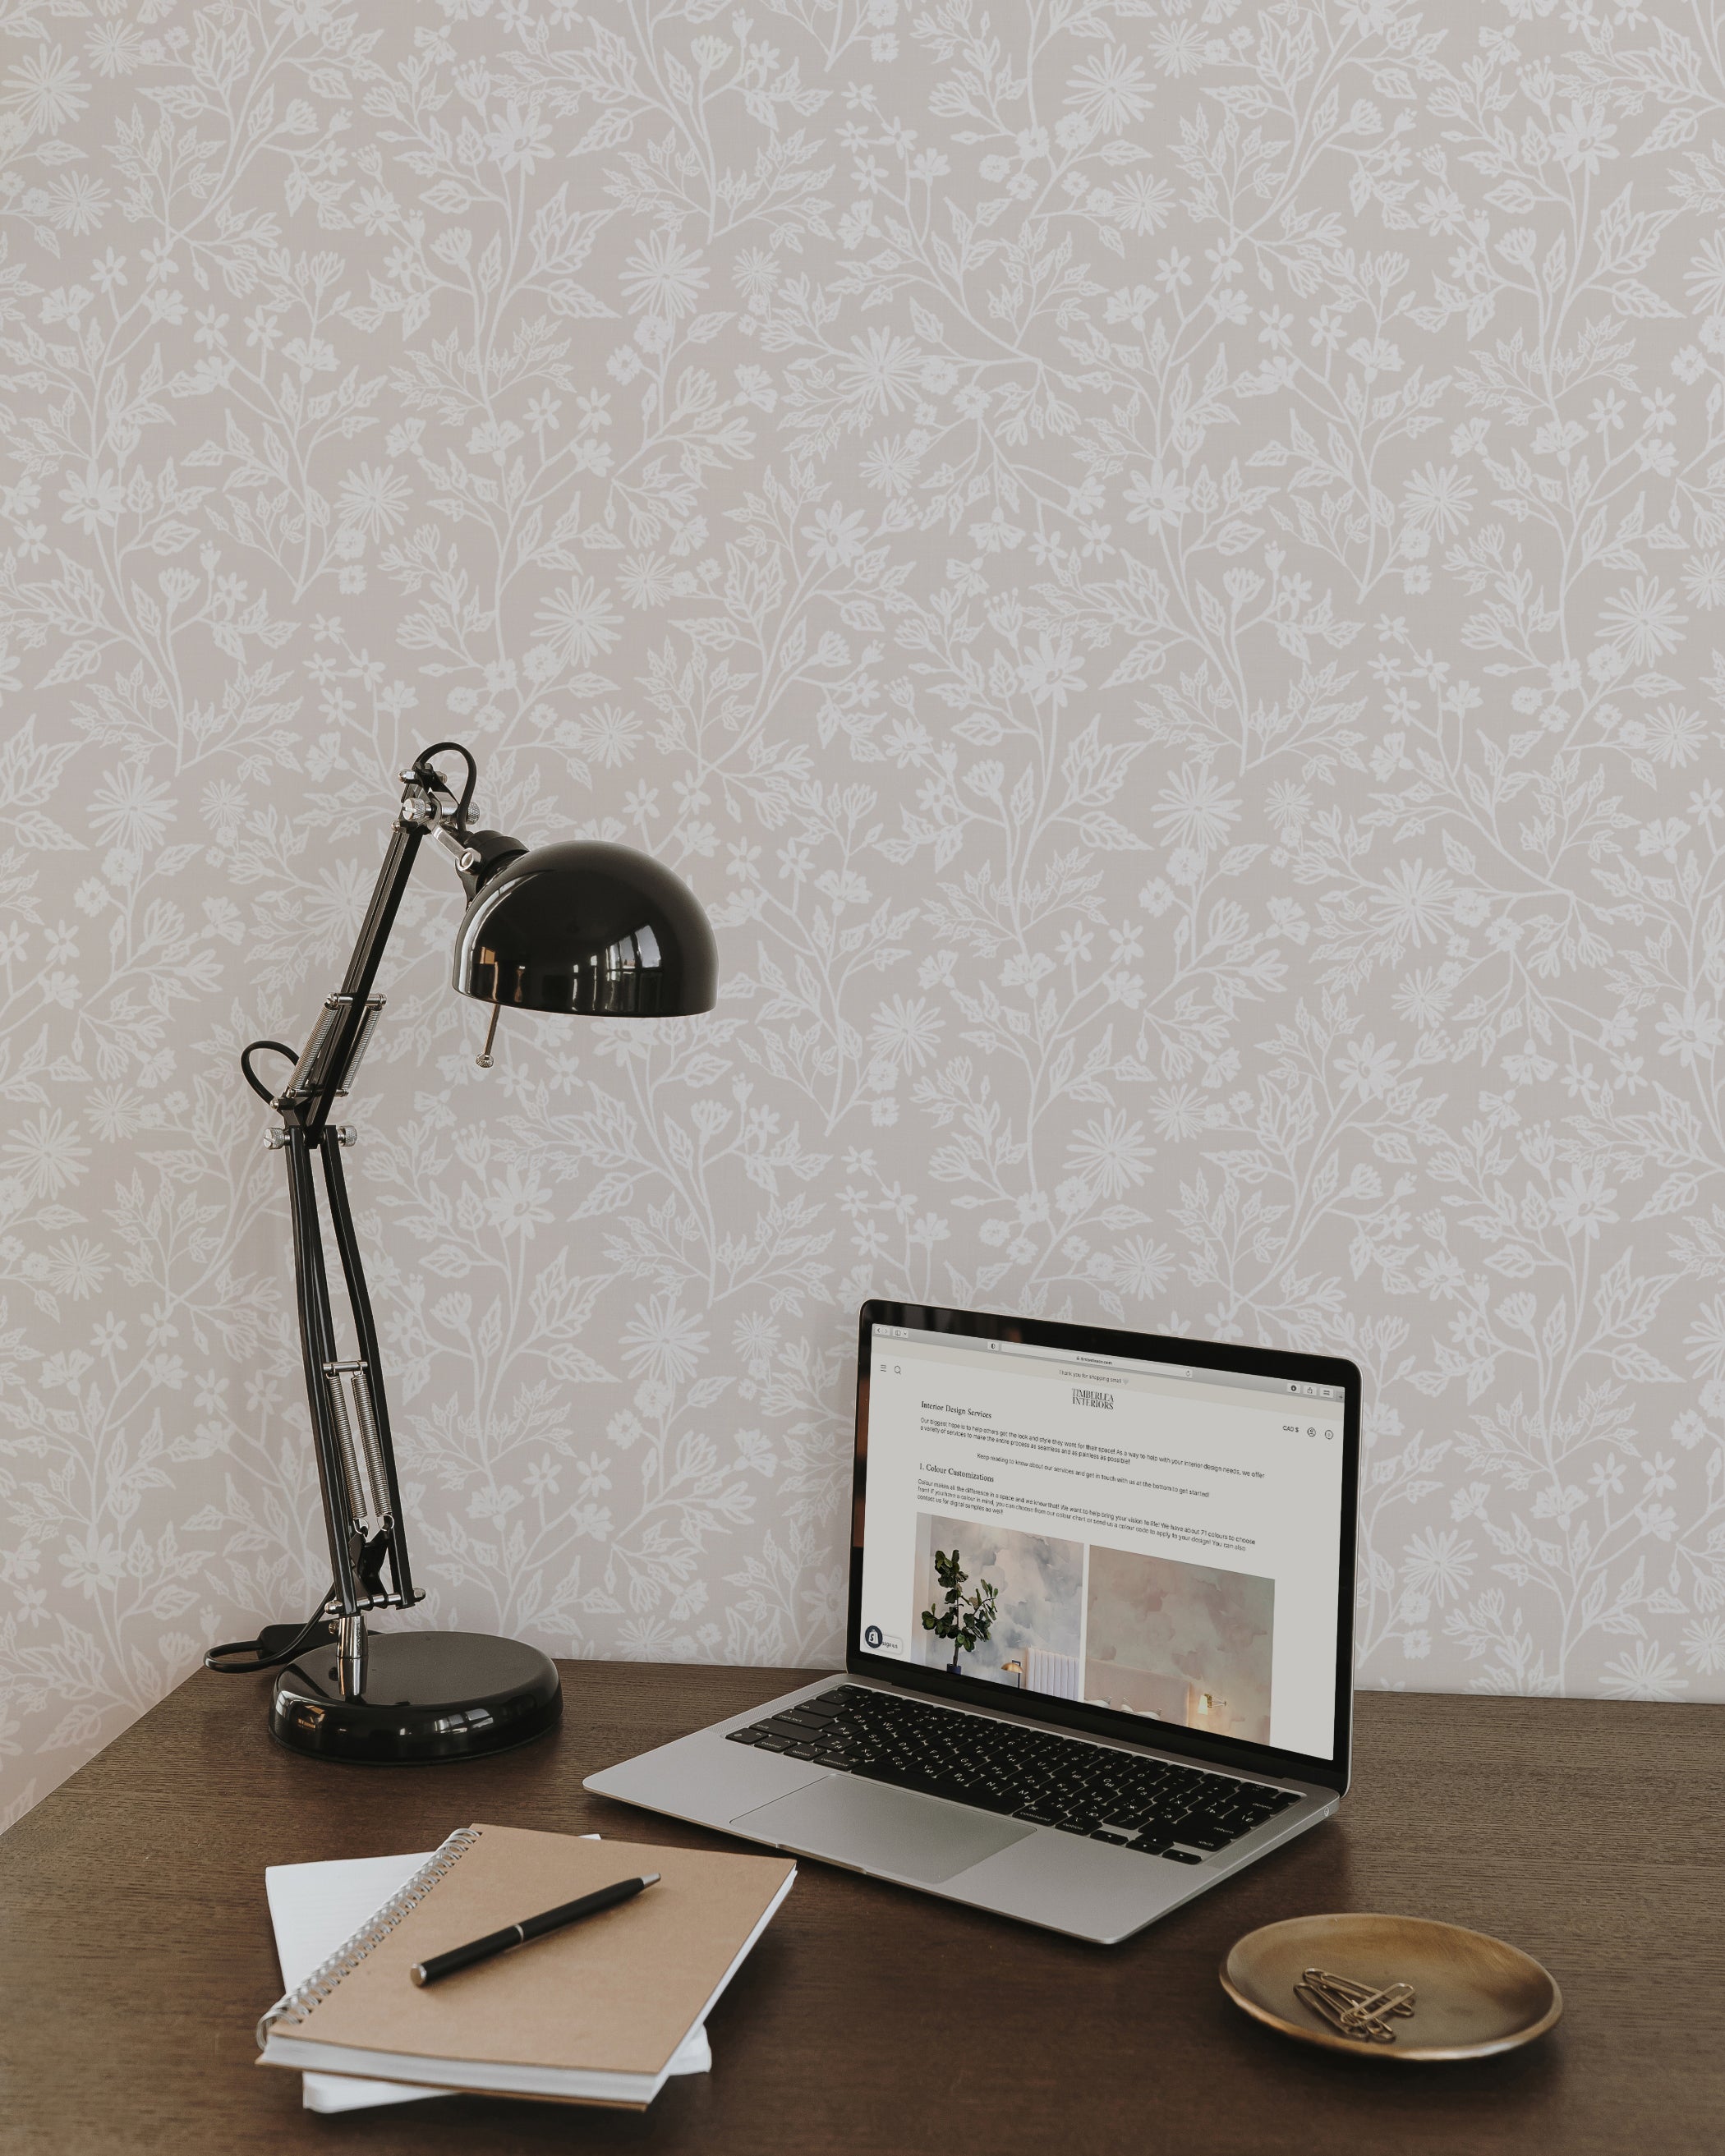 A stylish home office featuring Blossom Haze Wallpaper, decorated with a subtle floral pattern in shades of light gray on a white background. The elegant wallpaper enhances the modern workspace equipped with a black desk lamp, laptop, and notebooks.